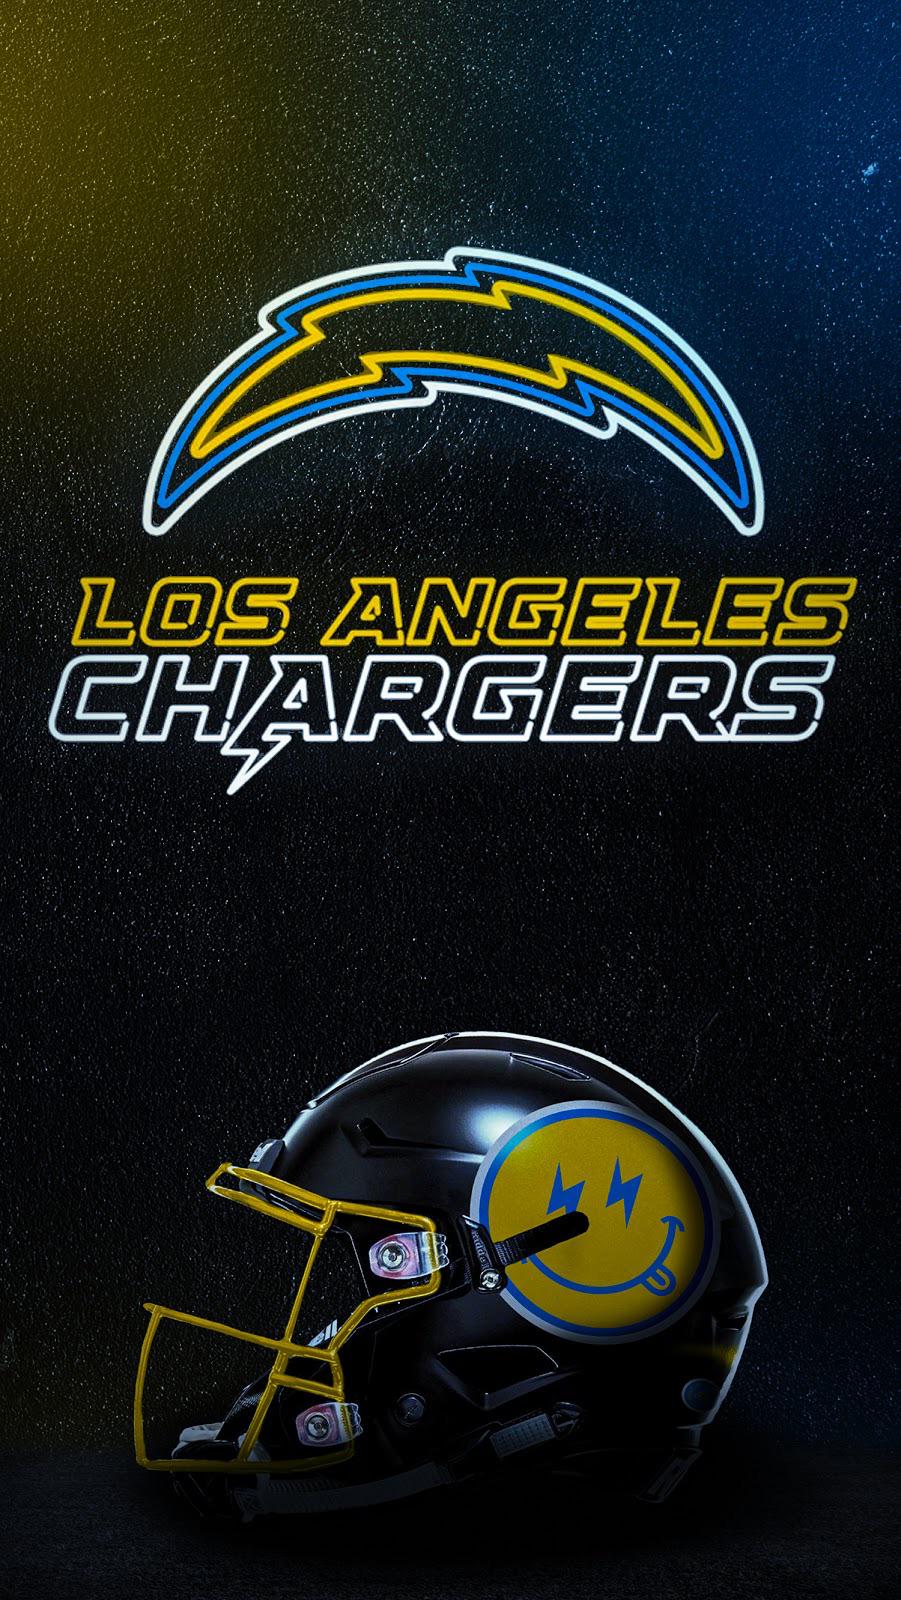 Chargers Wallpapers - Wallpaper Cave